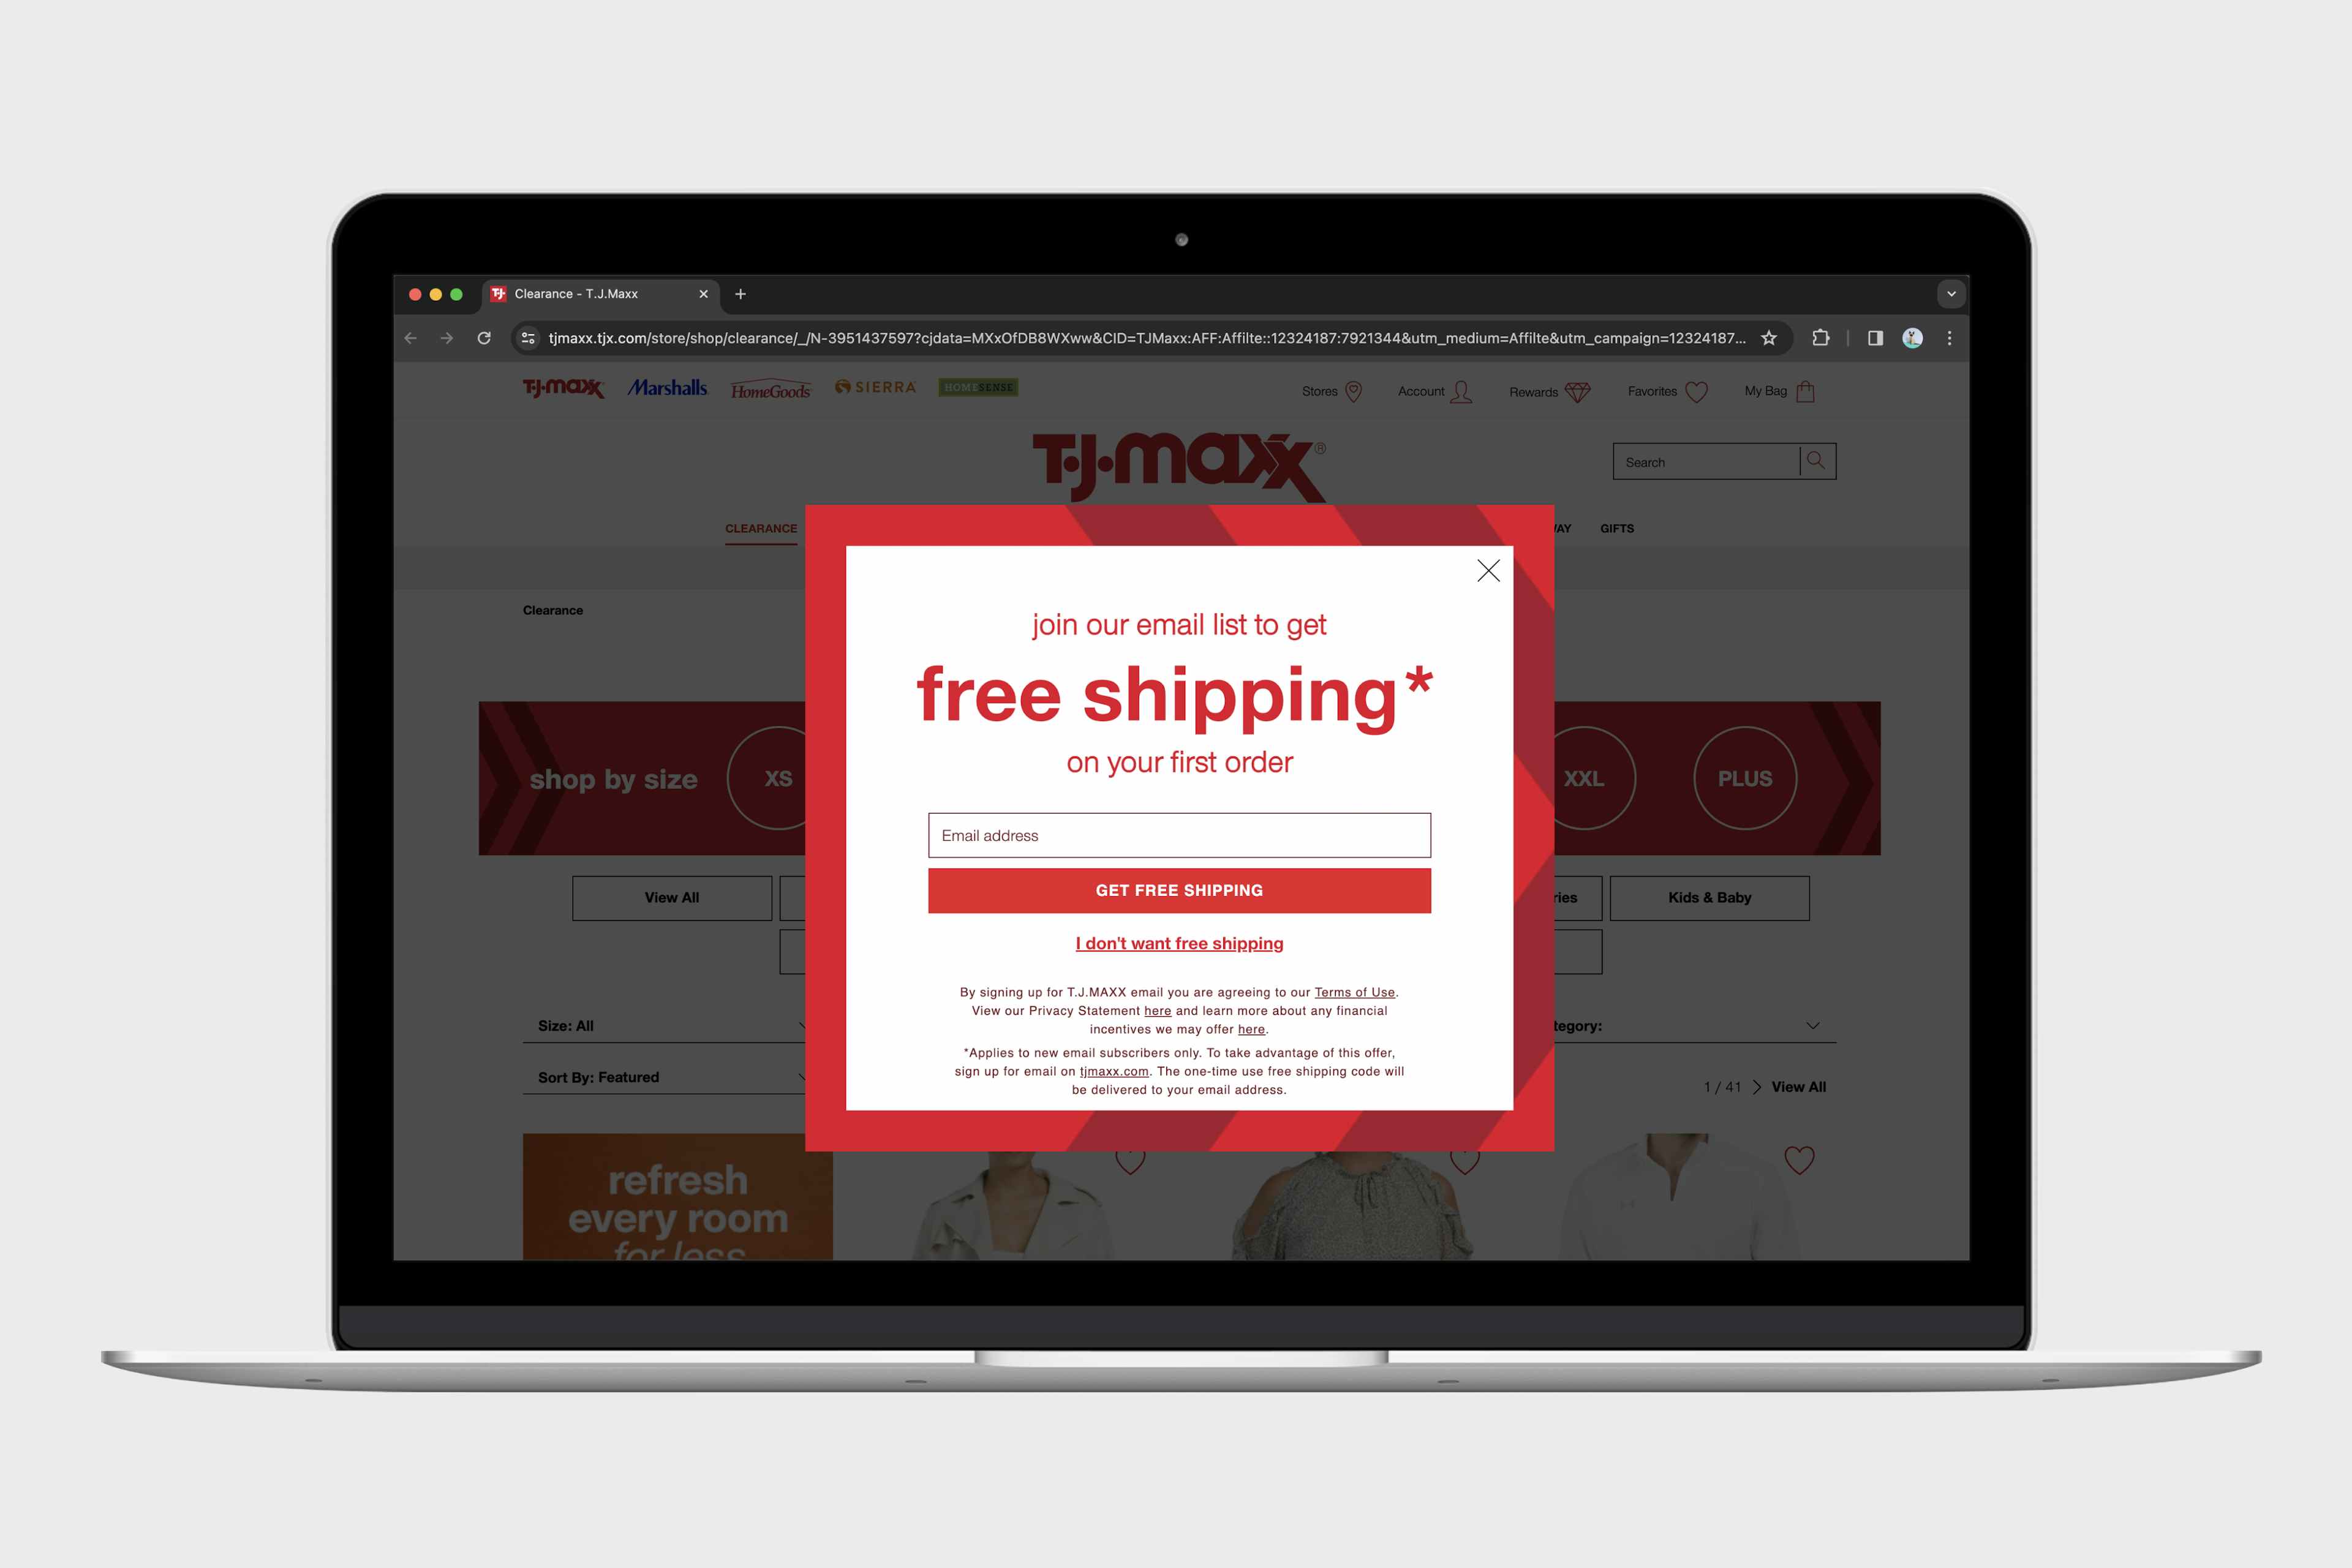 a sign up for the newsletter for free shipping on the TJMaxx website